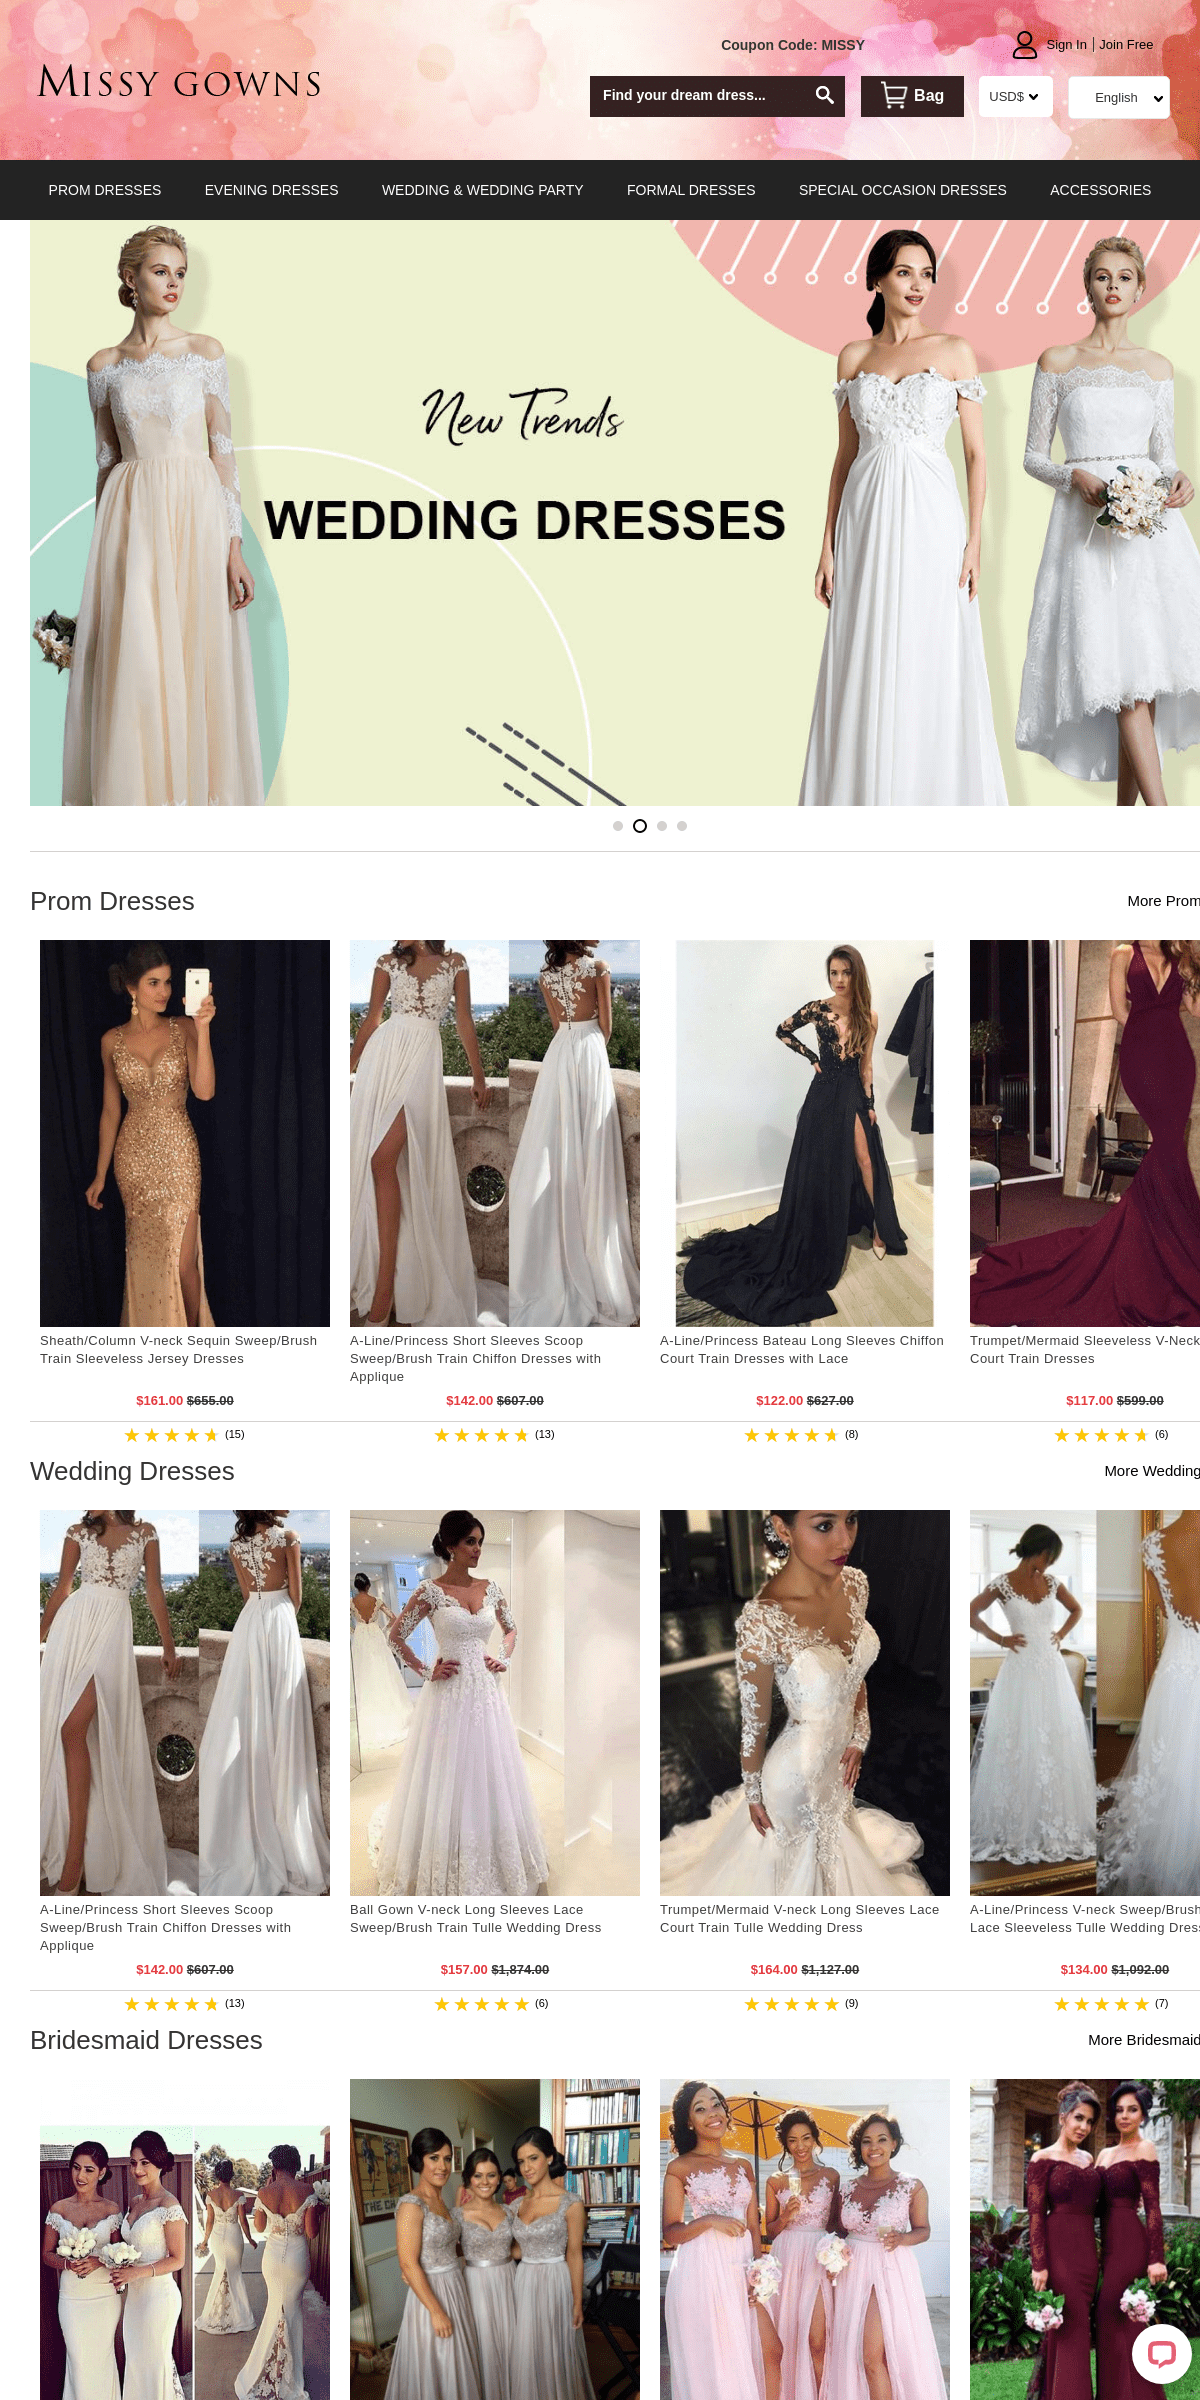 A complete backup of missygowns.com